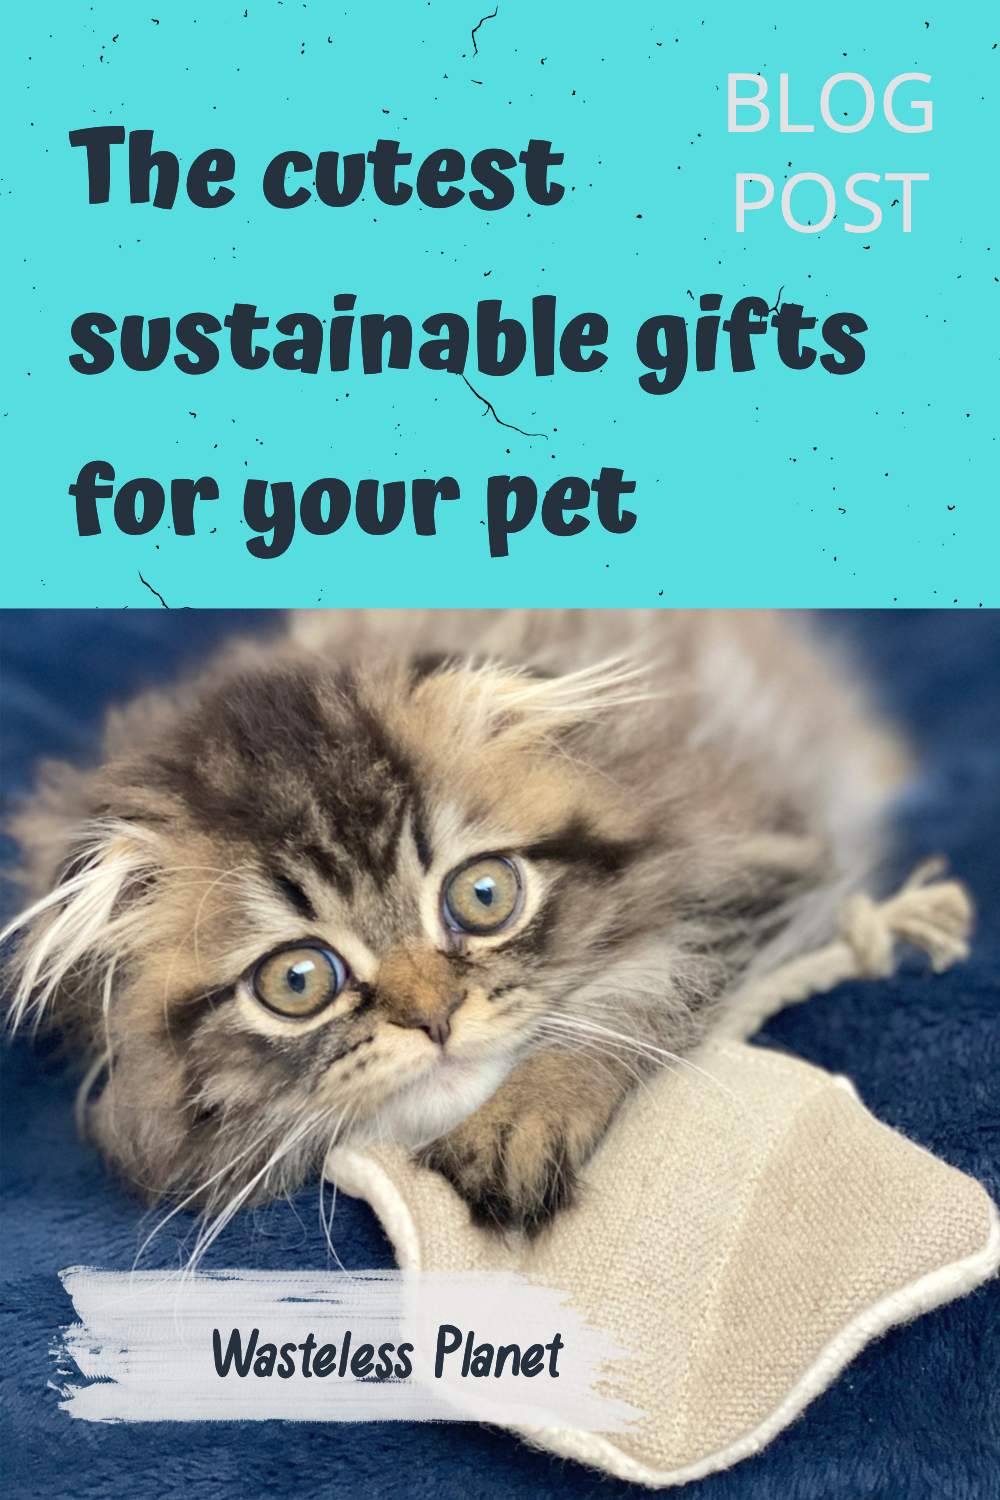 These are the cutest sustainable gifts for your pet (cats and dogs)